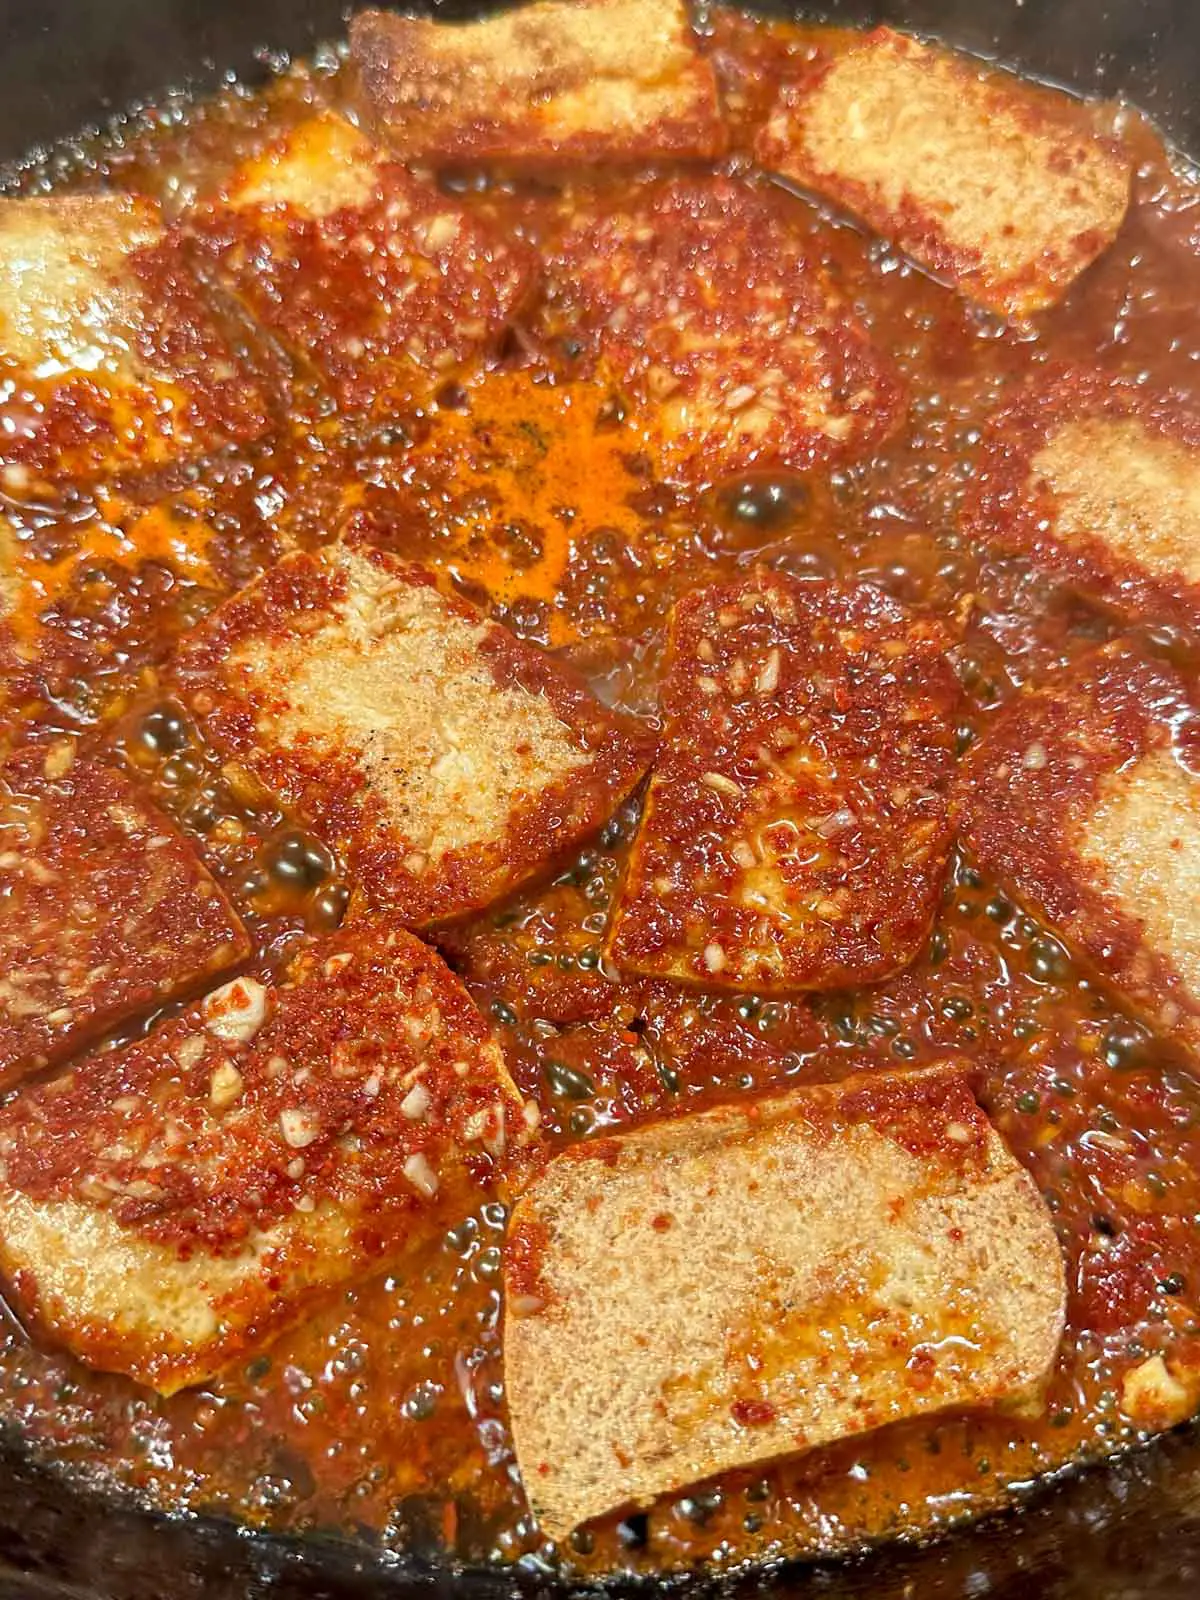 Pieces of browned tofu in a spicy simmering sauce in a cast iron skillet.